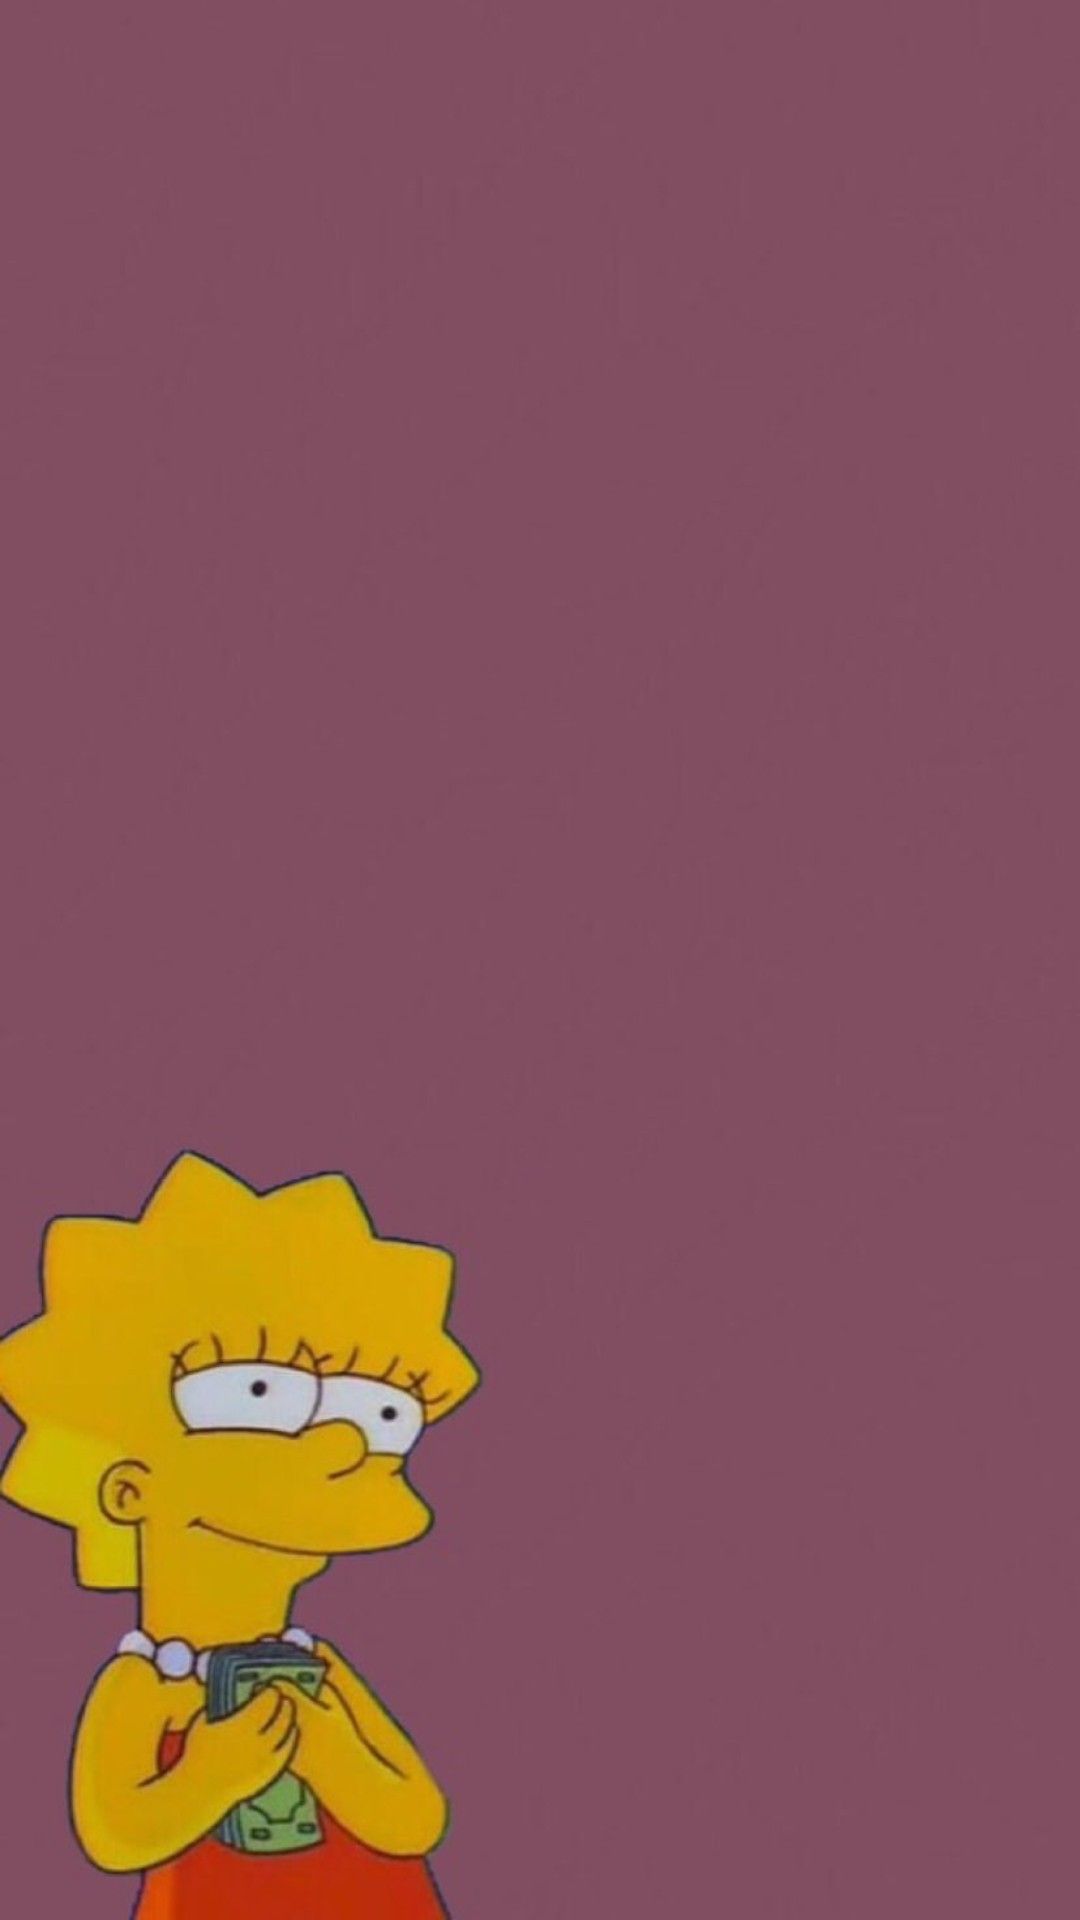 Lisa Simpson iPhone Wallpaper with high-resolution 1080x1920 pixel. You can use this wallpaper for your iPhone 5, 6, 7, 8, X, XS, XR backgrounds, Mobile Screensaver, or iPad Lock Screen - Lisa Simpson, The Simpsons